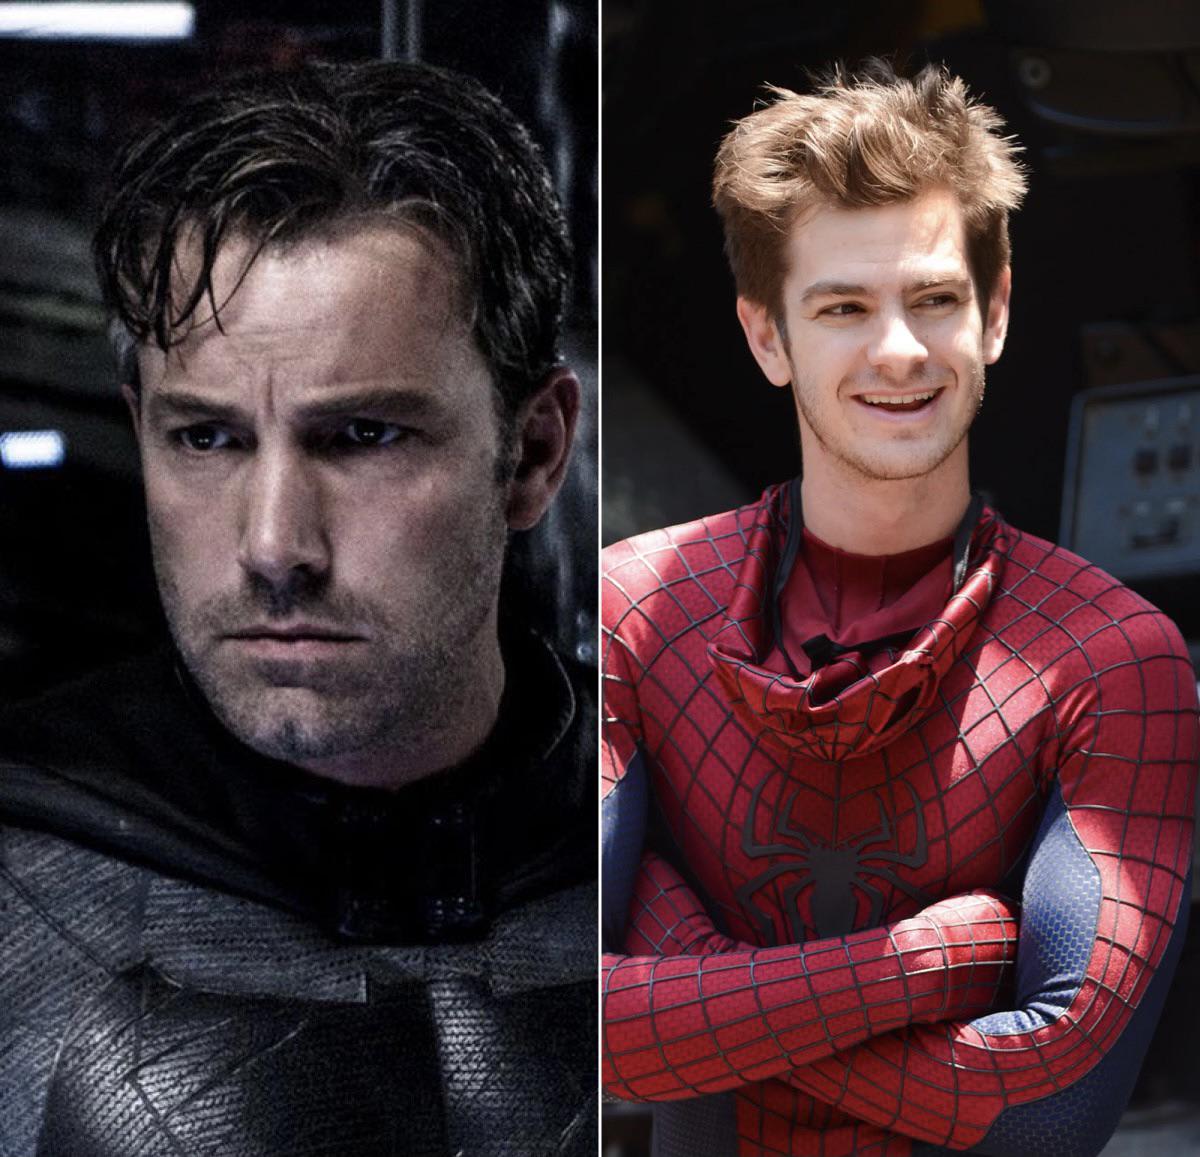 Can we all agree that Ben Affleck is the Andrew Garfield of the Batman fanbase